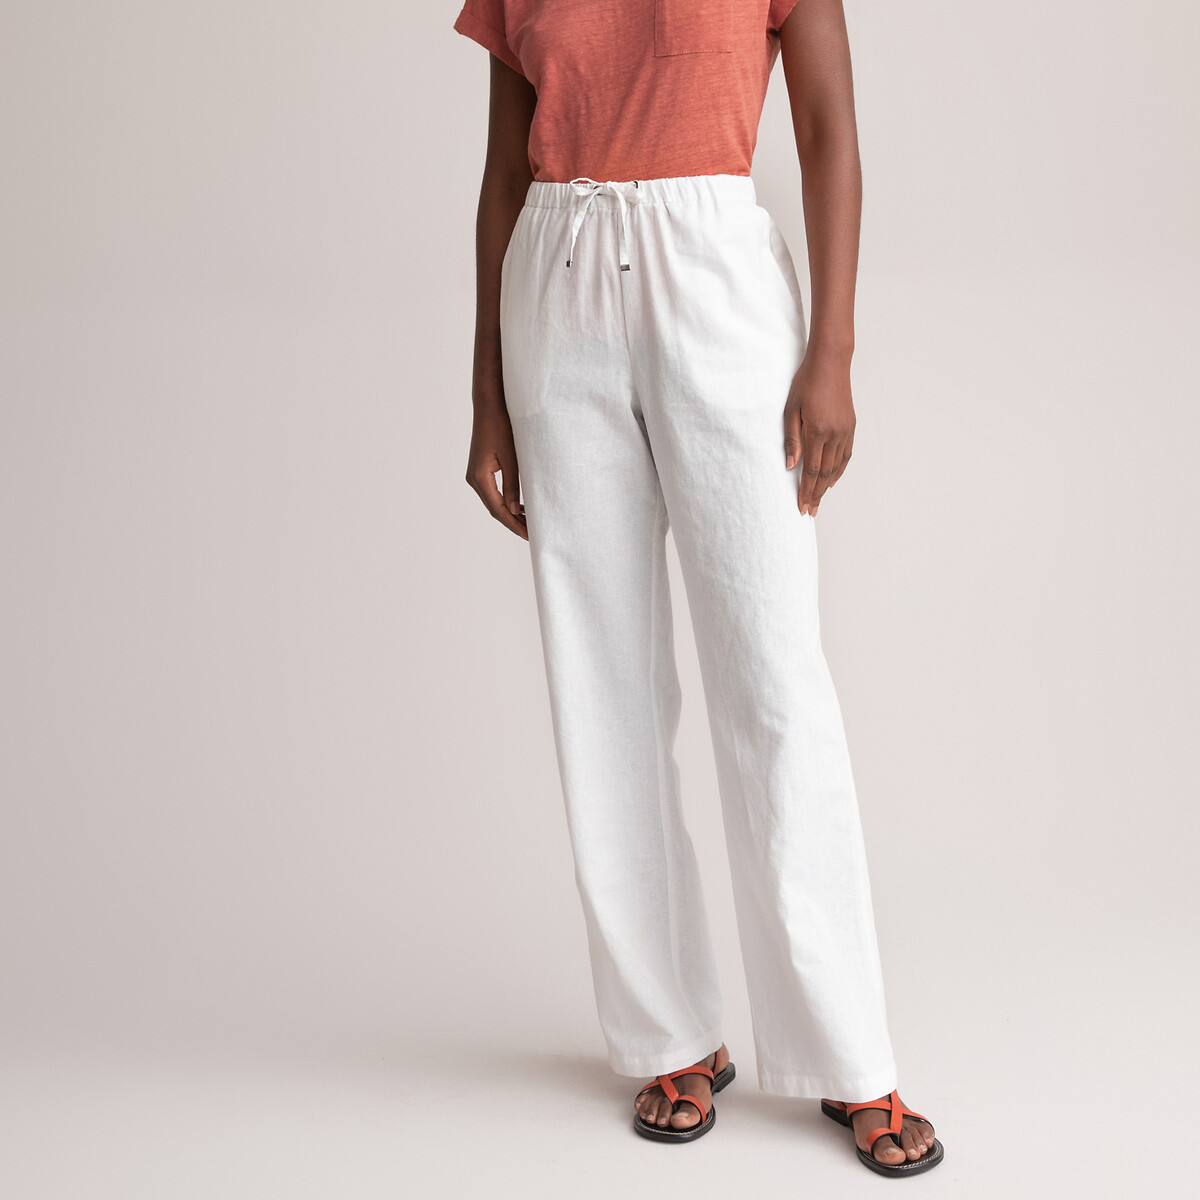 Image of Wide Leg Trousers in Linen/Cotton, Length 30.5"